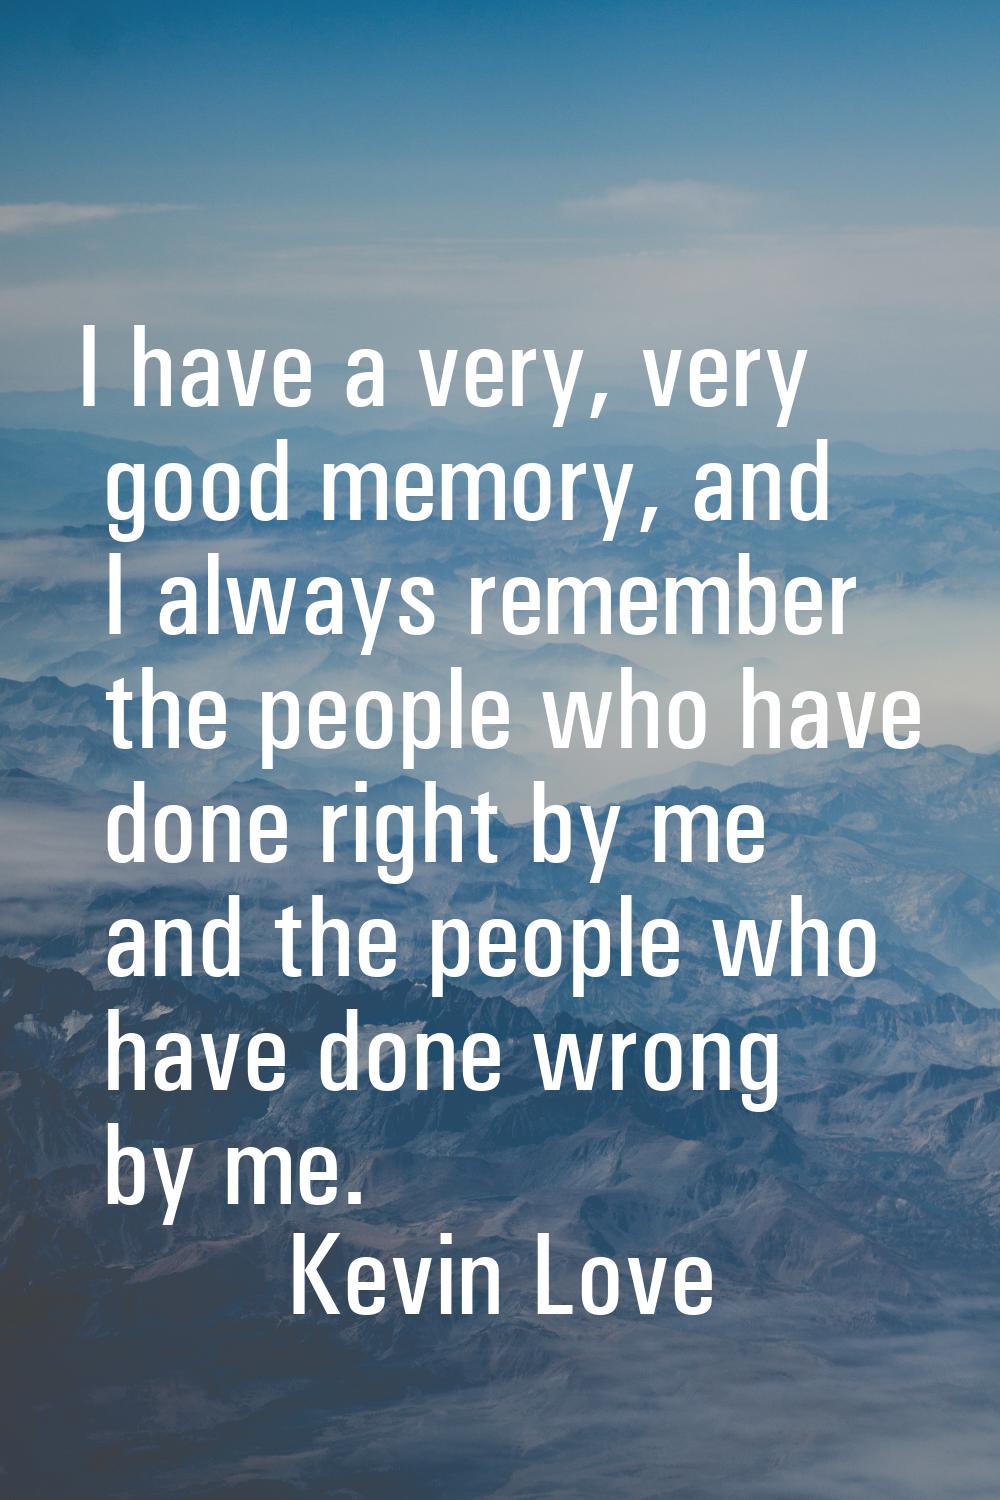 I have a very, very good memory, and I always remember the people who have done right by me and the